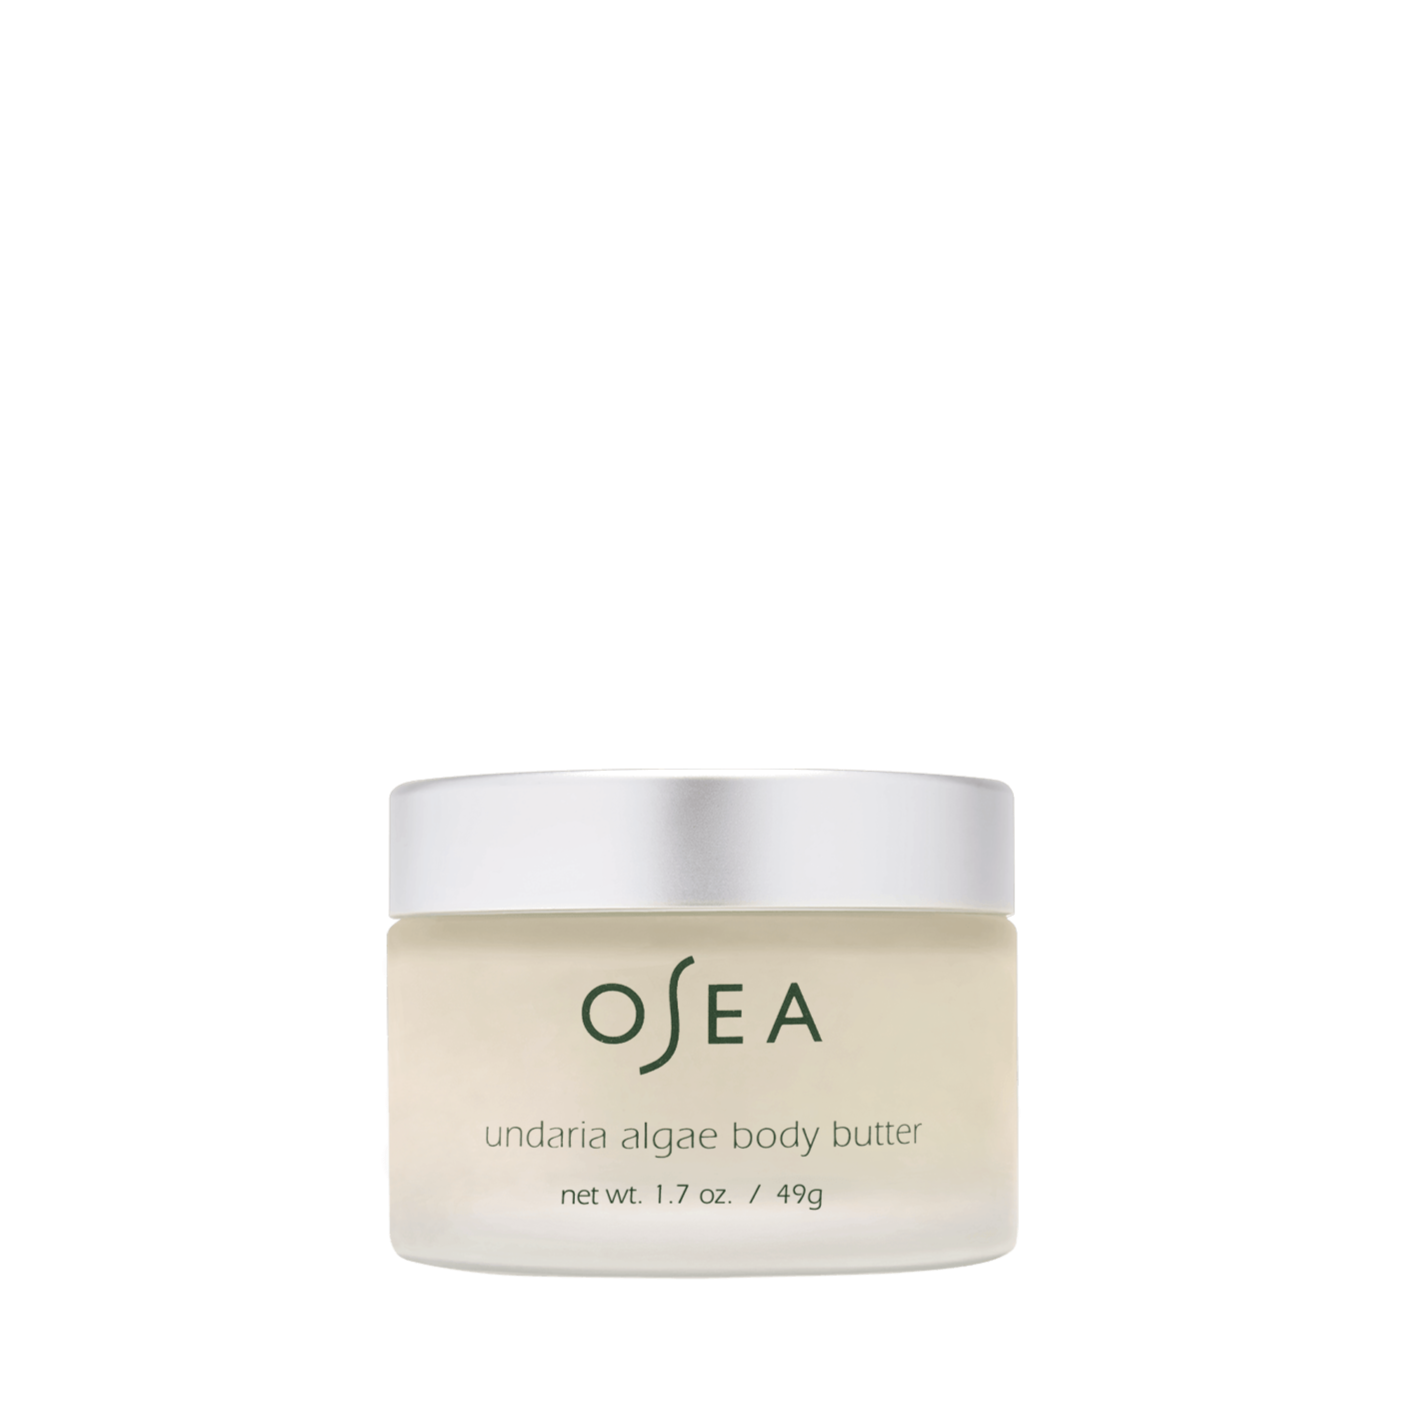 https://osea.imgix.net/products/OSEA_UndariaAlgaeBodyButter_OBMO-UABB-50-DTC.png?v=1648085388&auto=format,compress